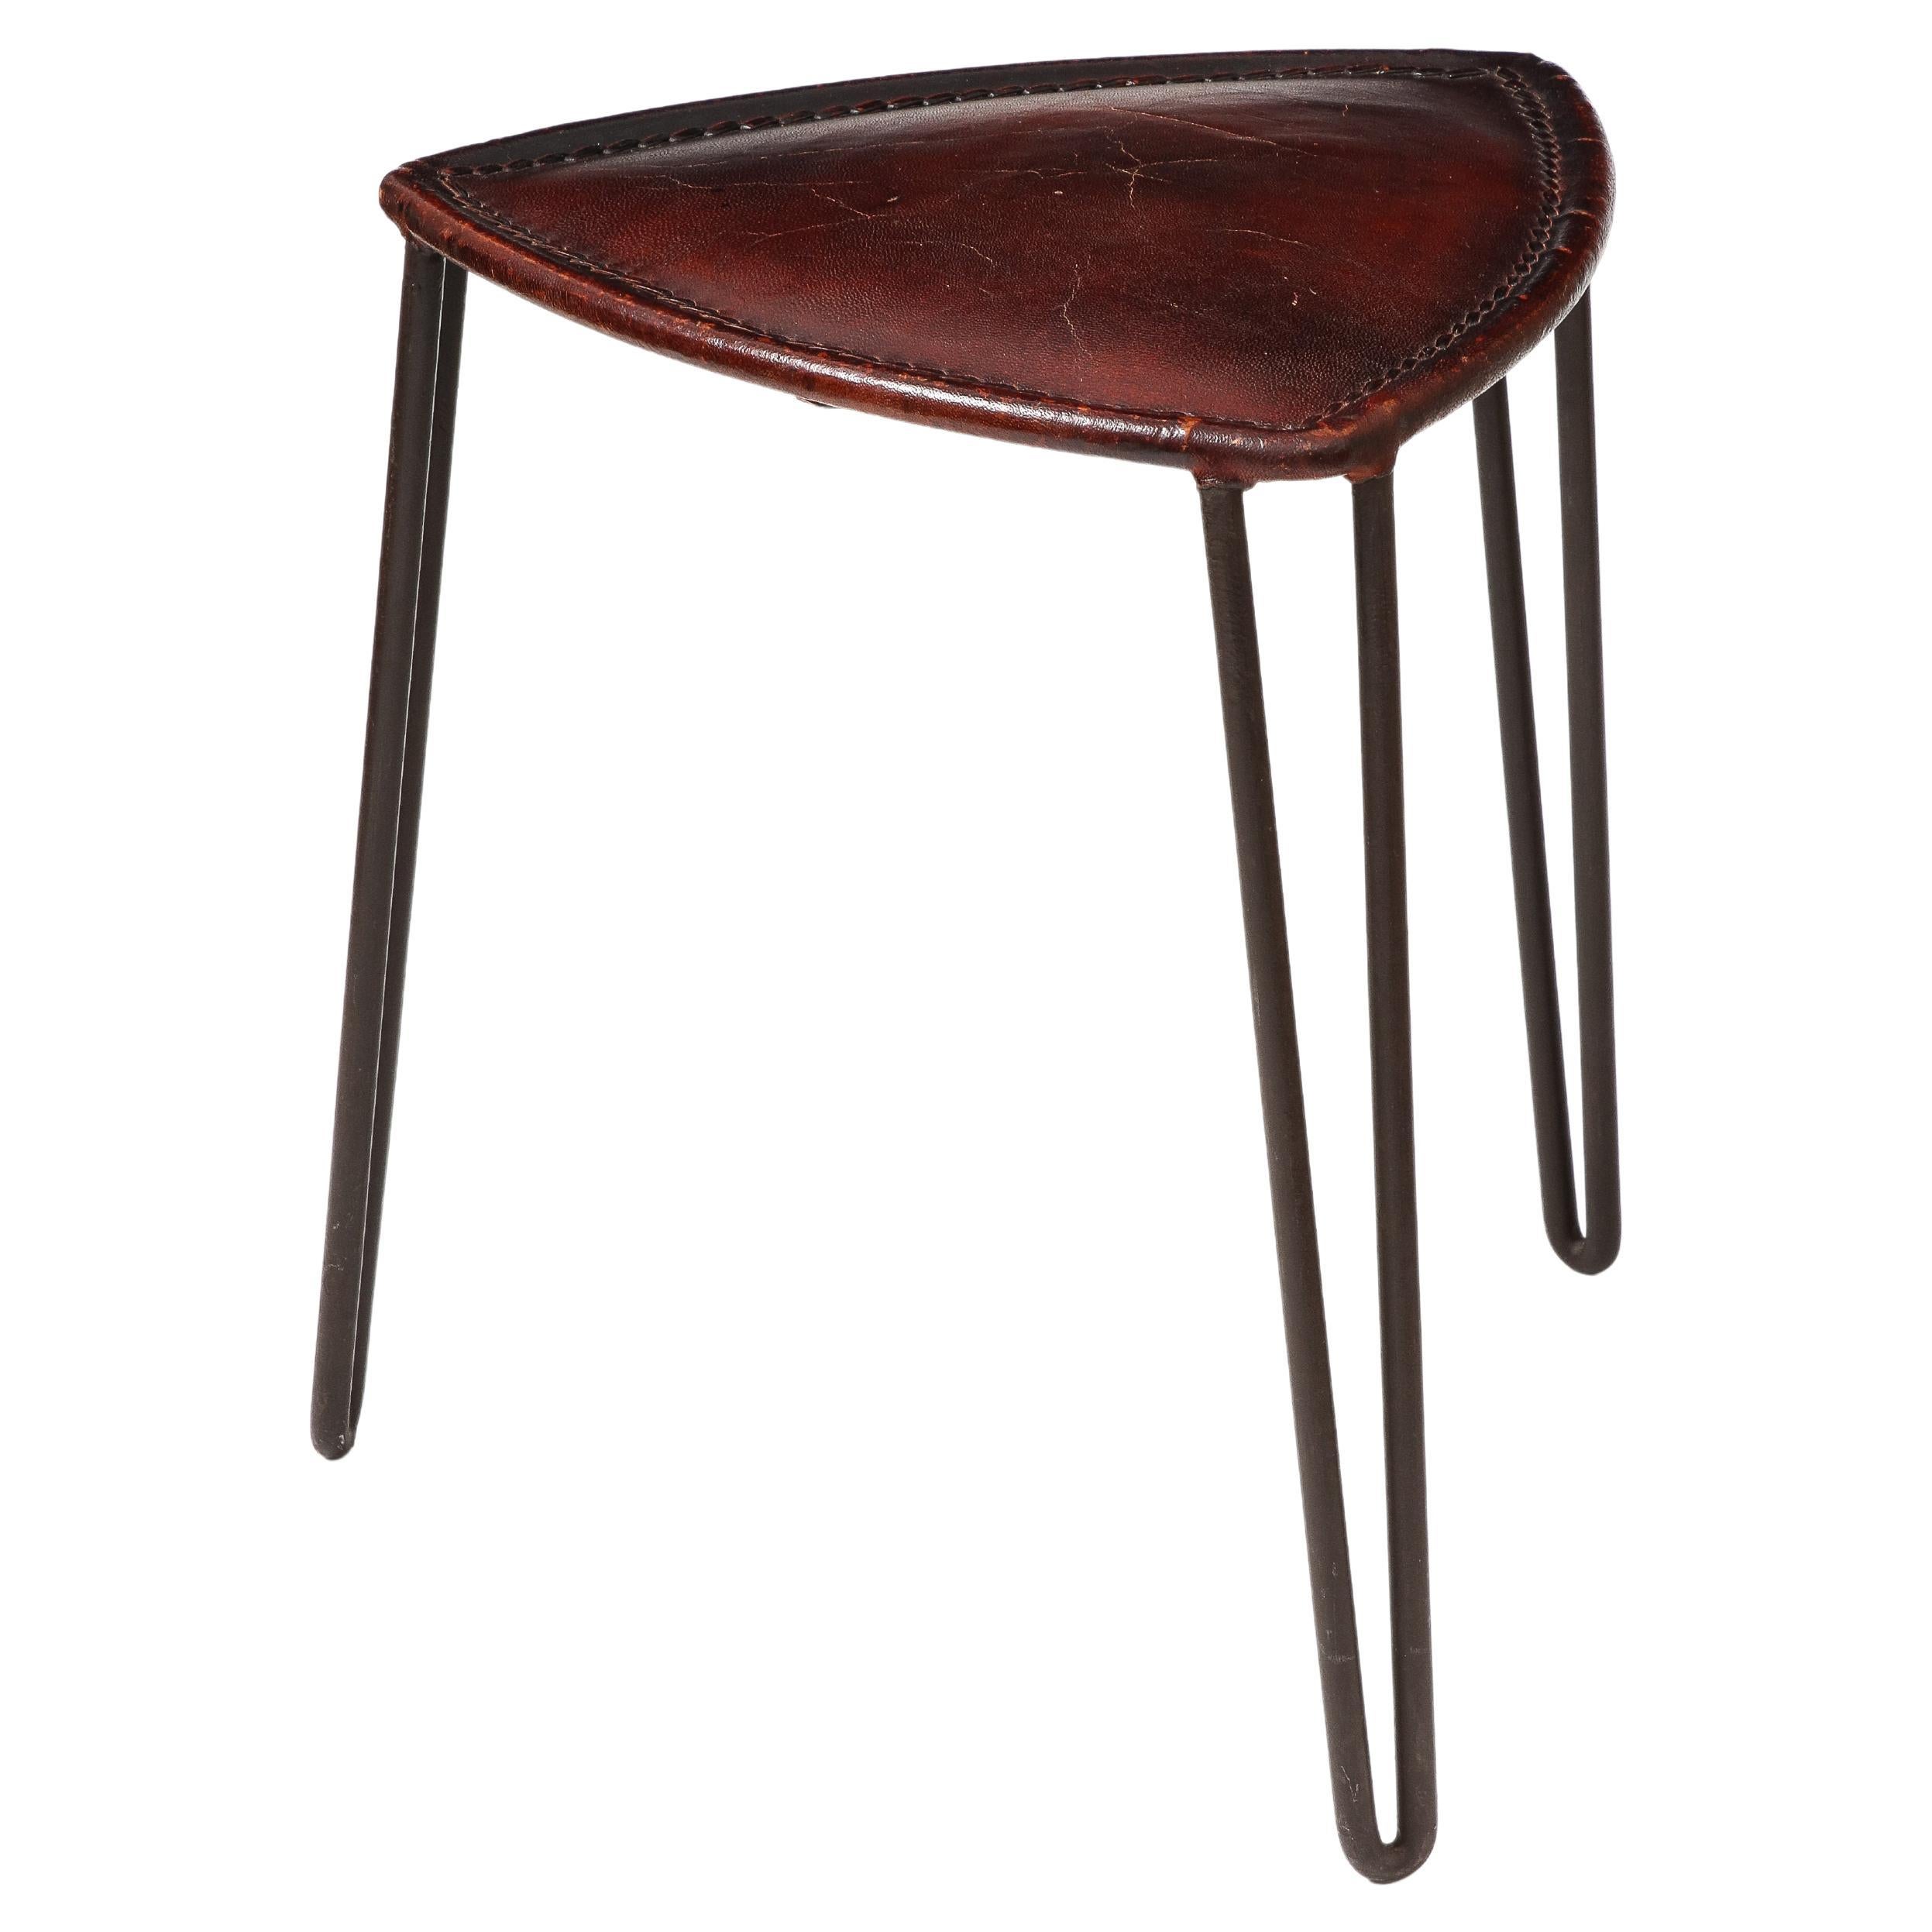 Leather and Metal Stool, France, c. 1950